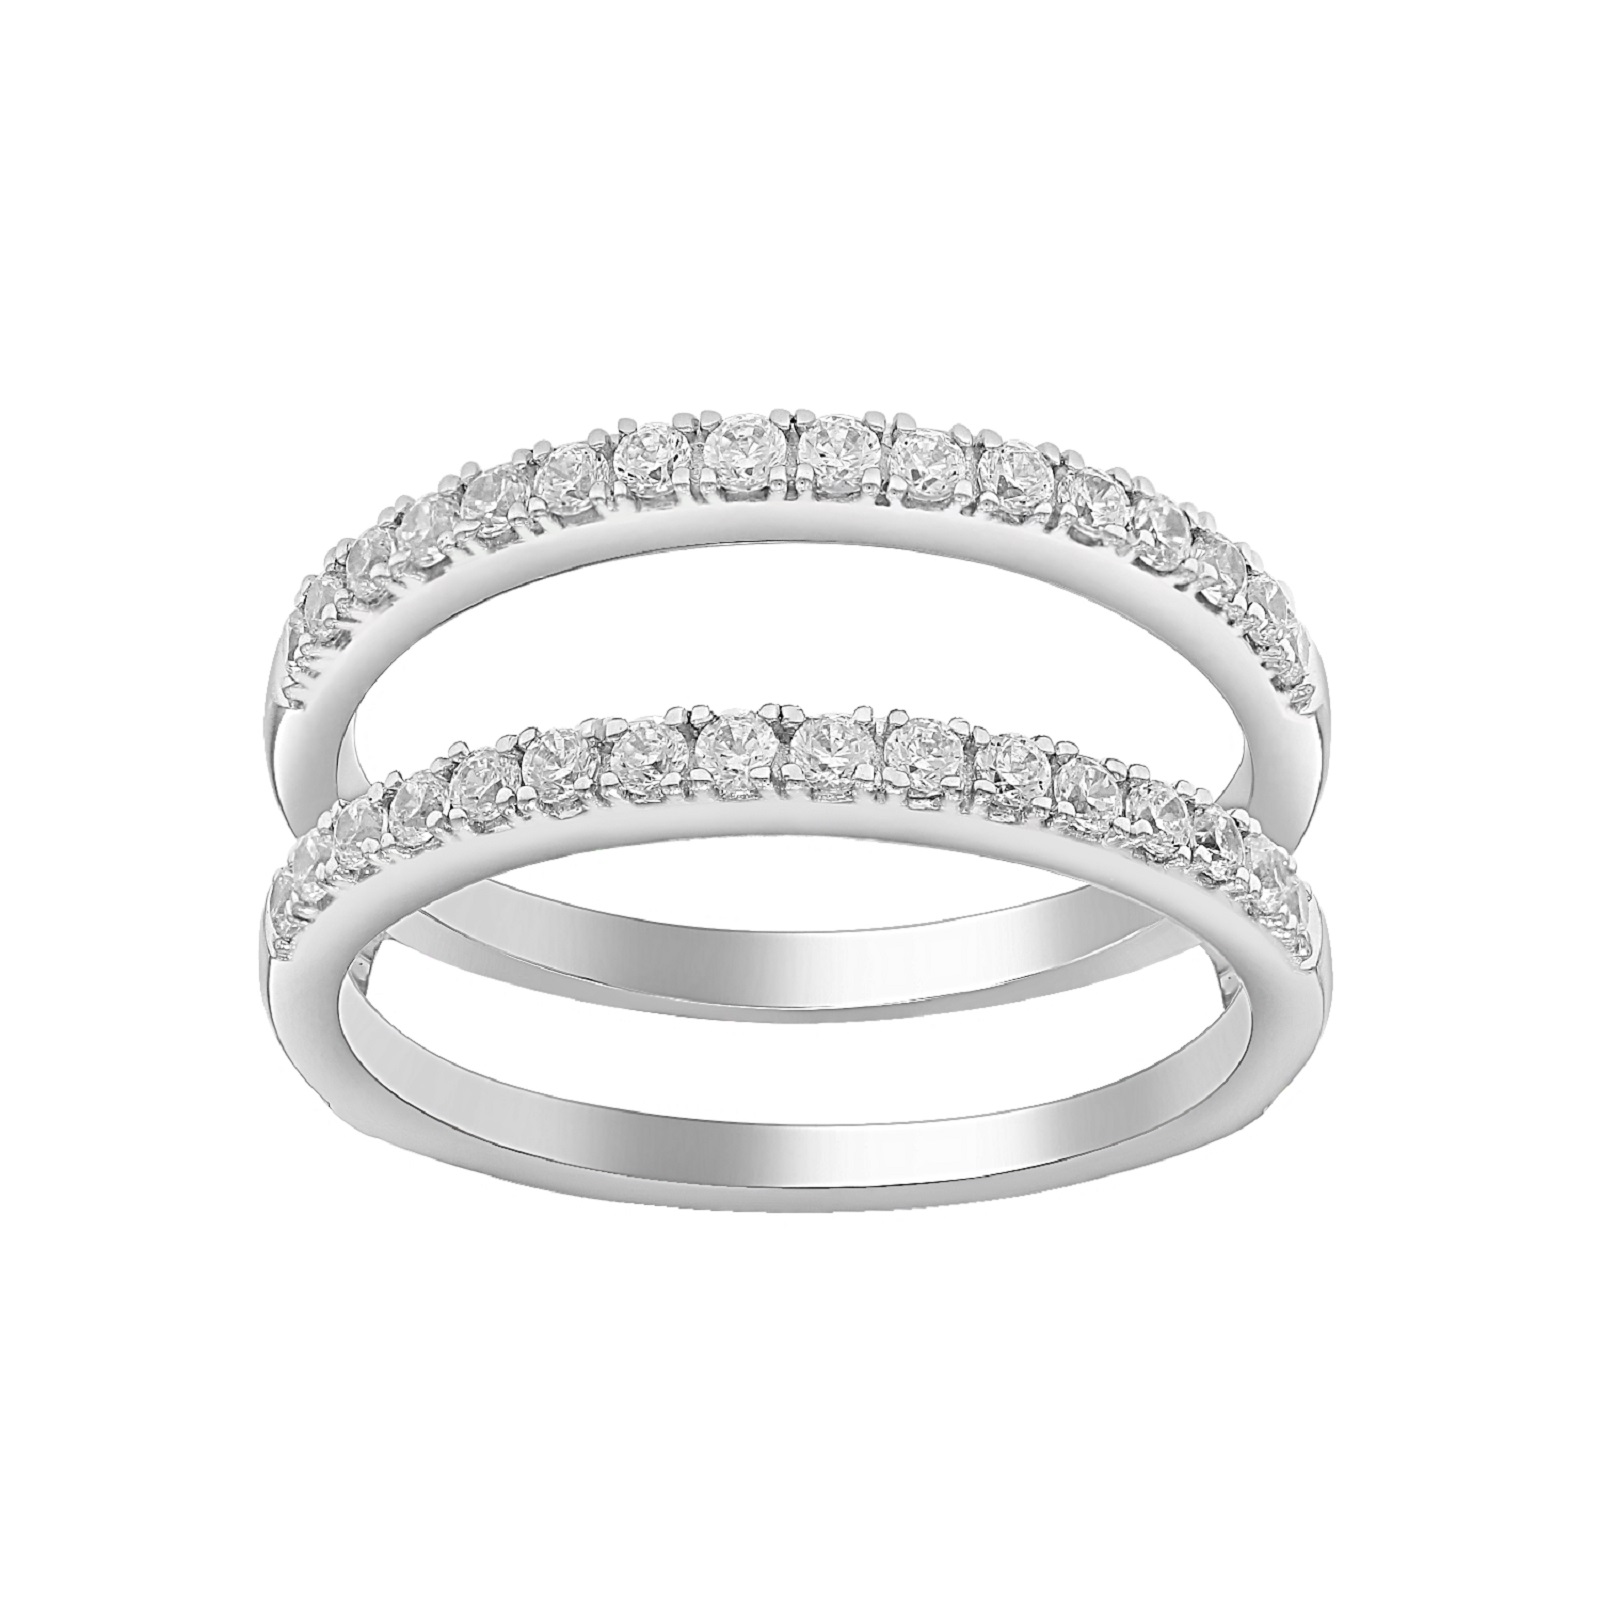 10K White Gold 0.50 CTTW Certified Diamond Ring - Size 7 Only